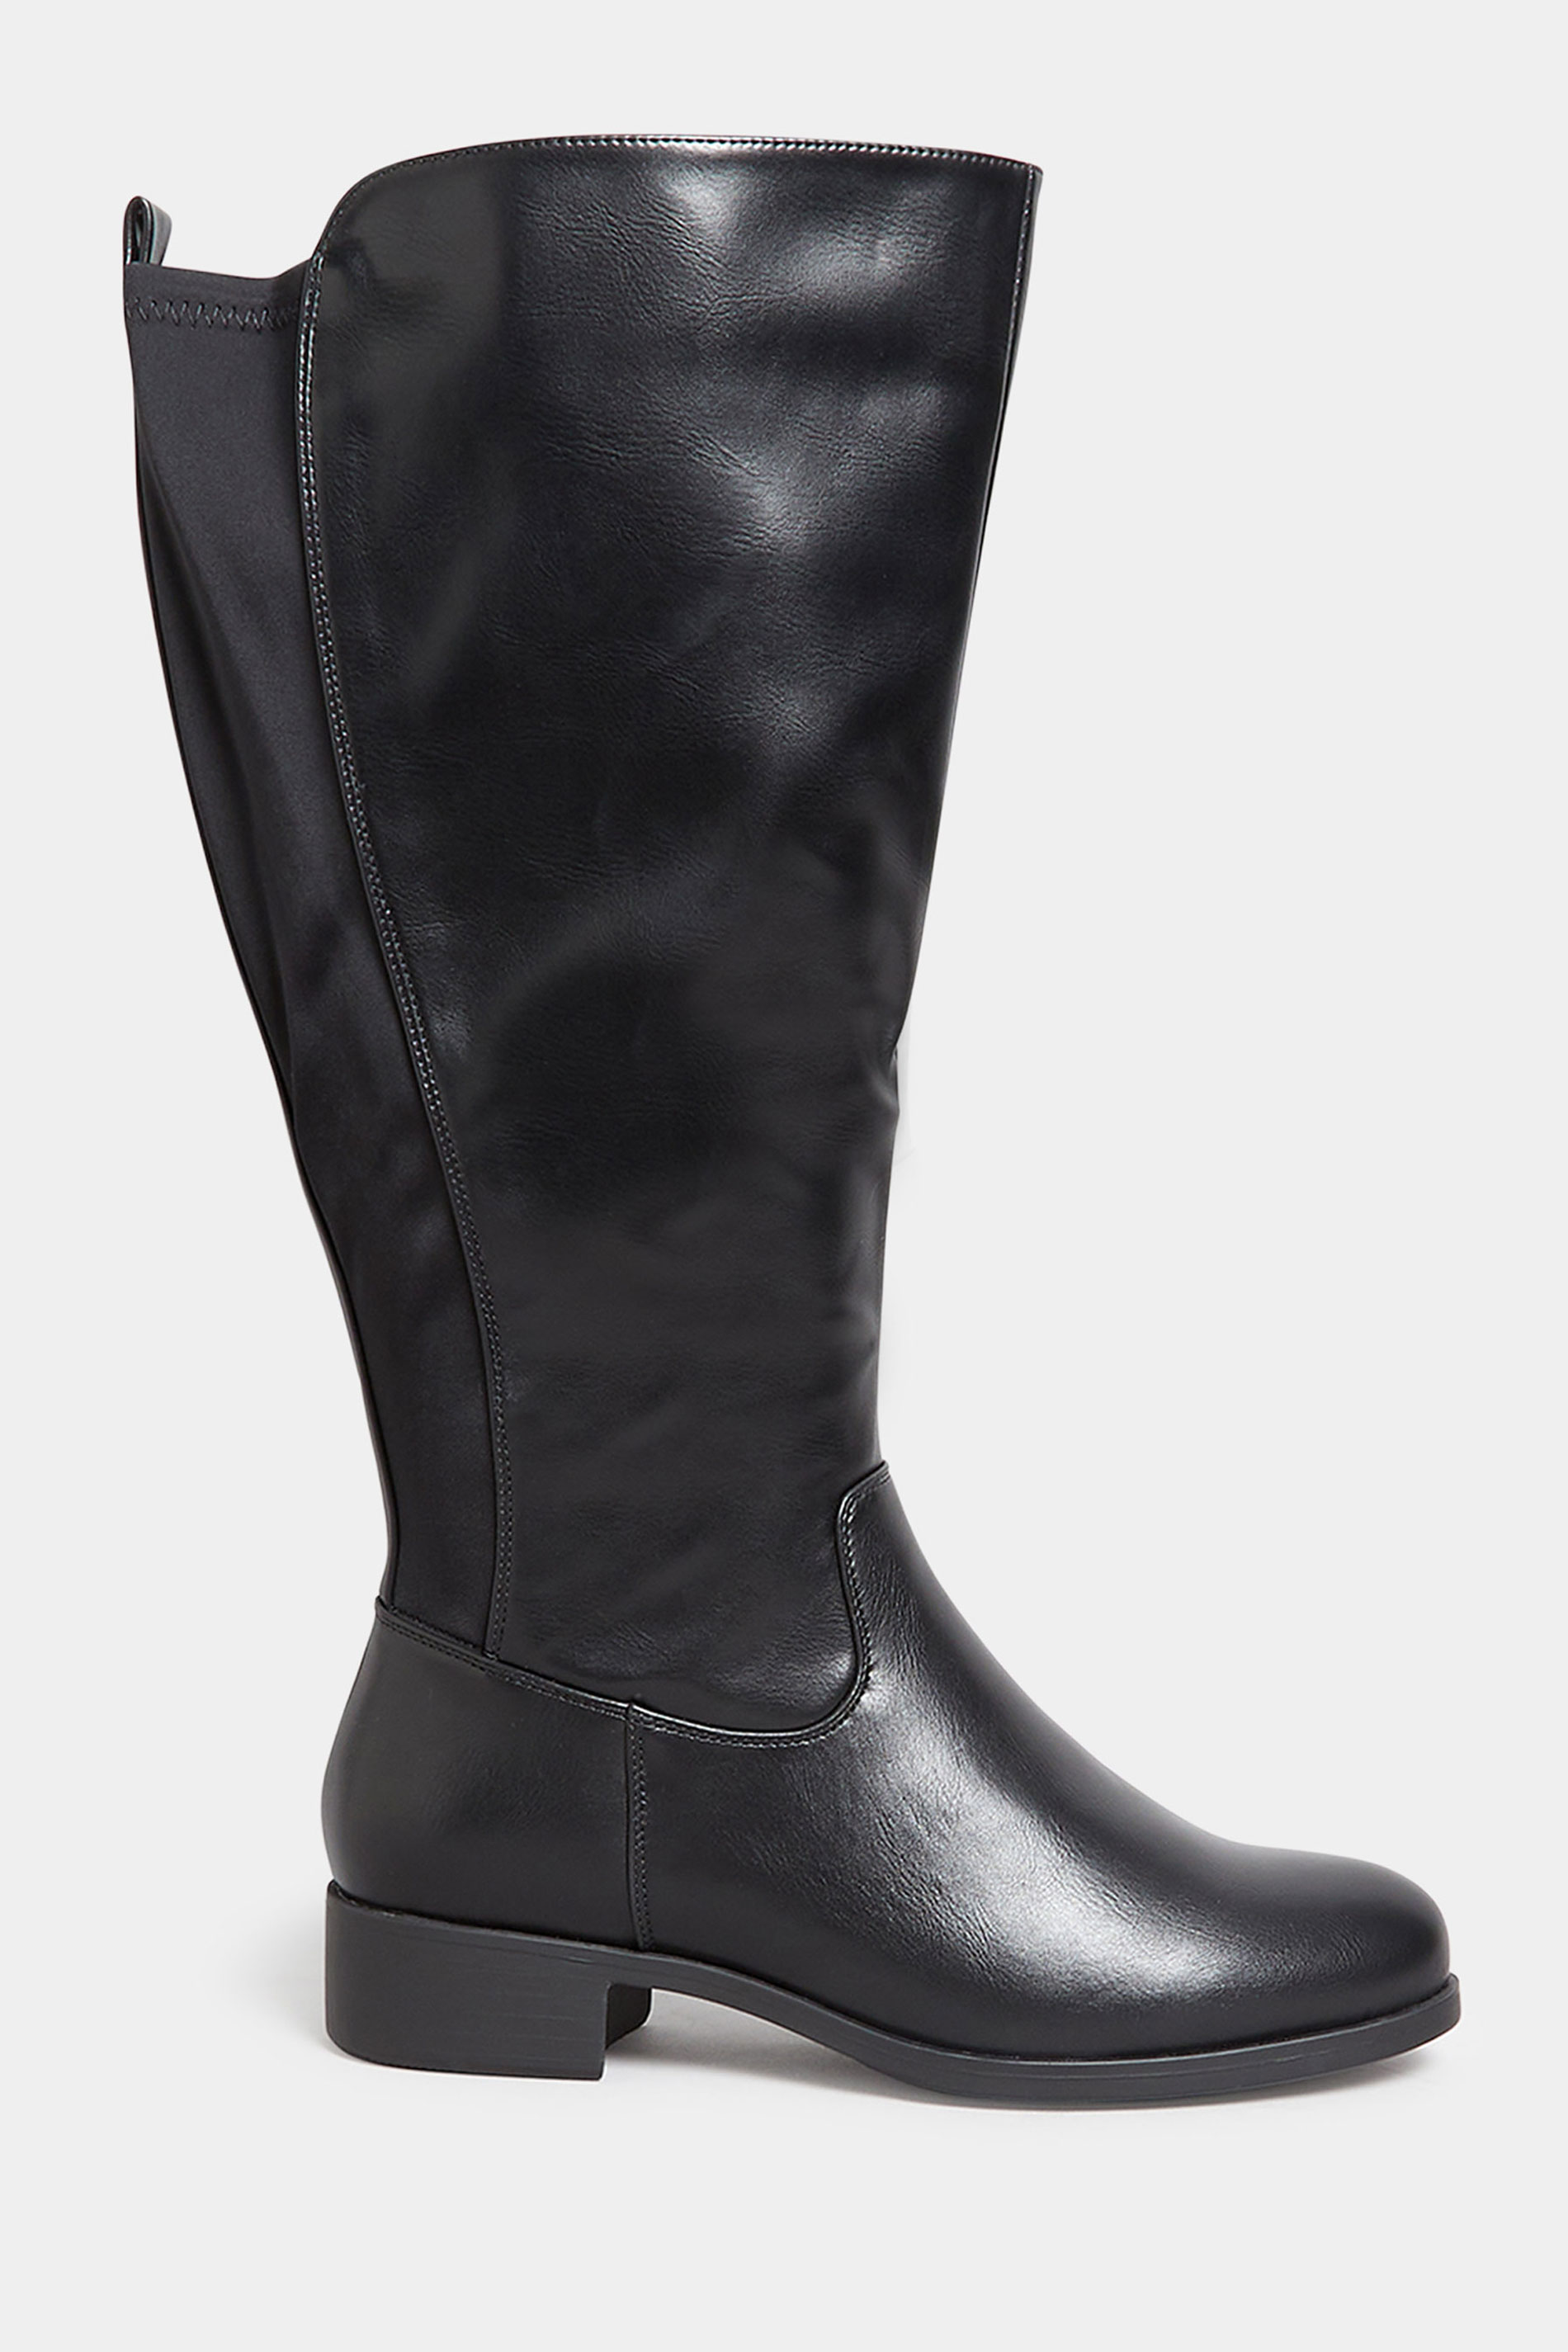 Black Stretch Knee High Boots In Wide E Fit & Extra Wide EEE Fit | Yours Clothing 3